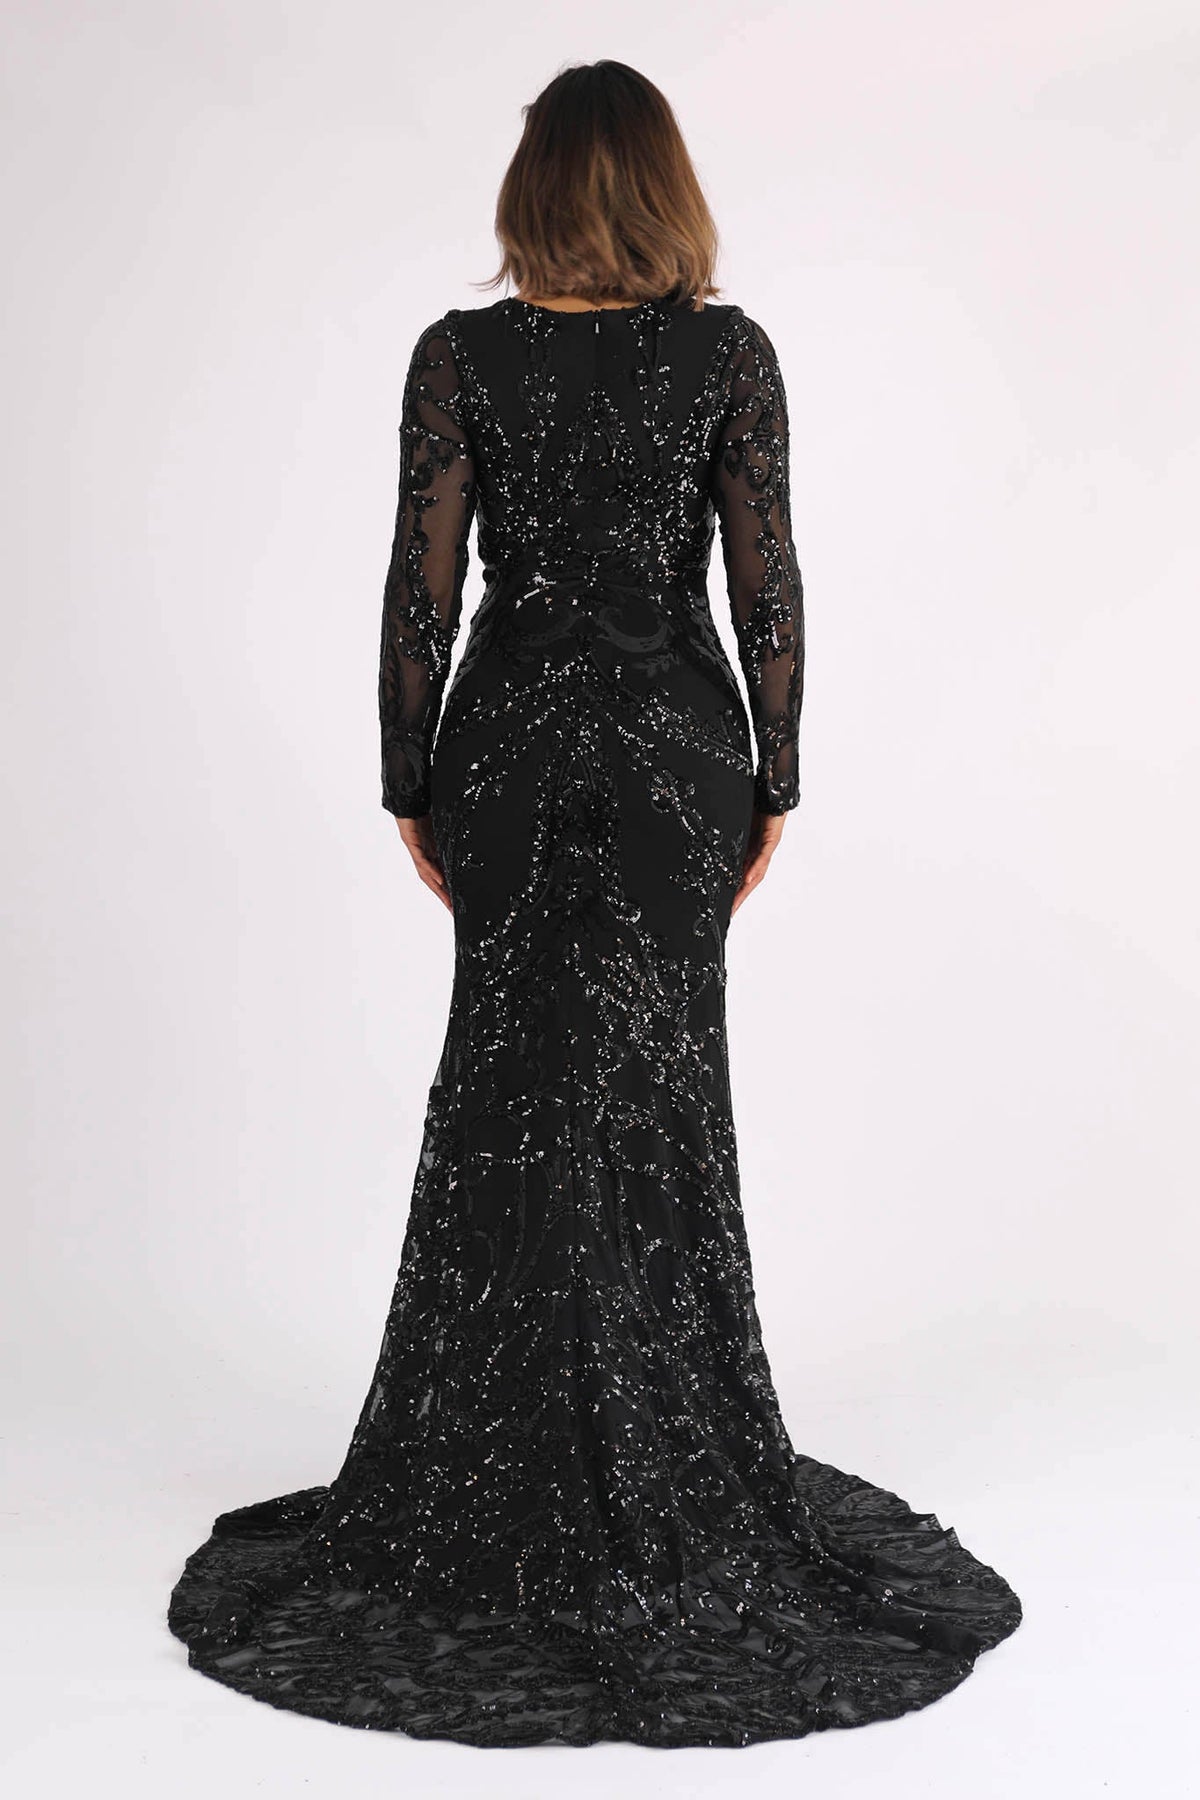 Back Image of Black Long Sleeve Pattern Sequin Floor Length Evening Gown with Round Neck and Fit & Flare Silhouette